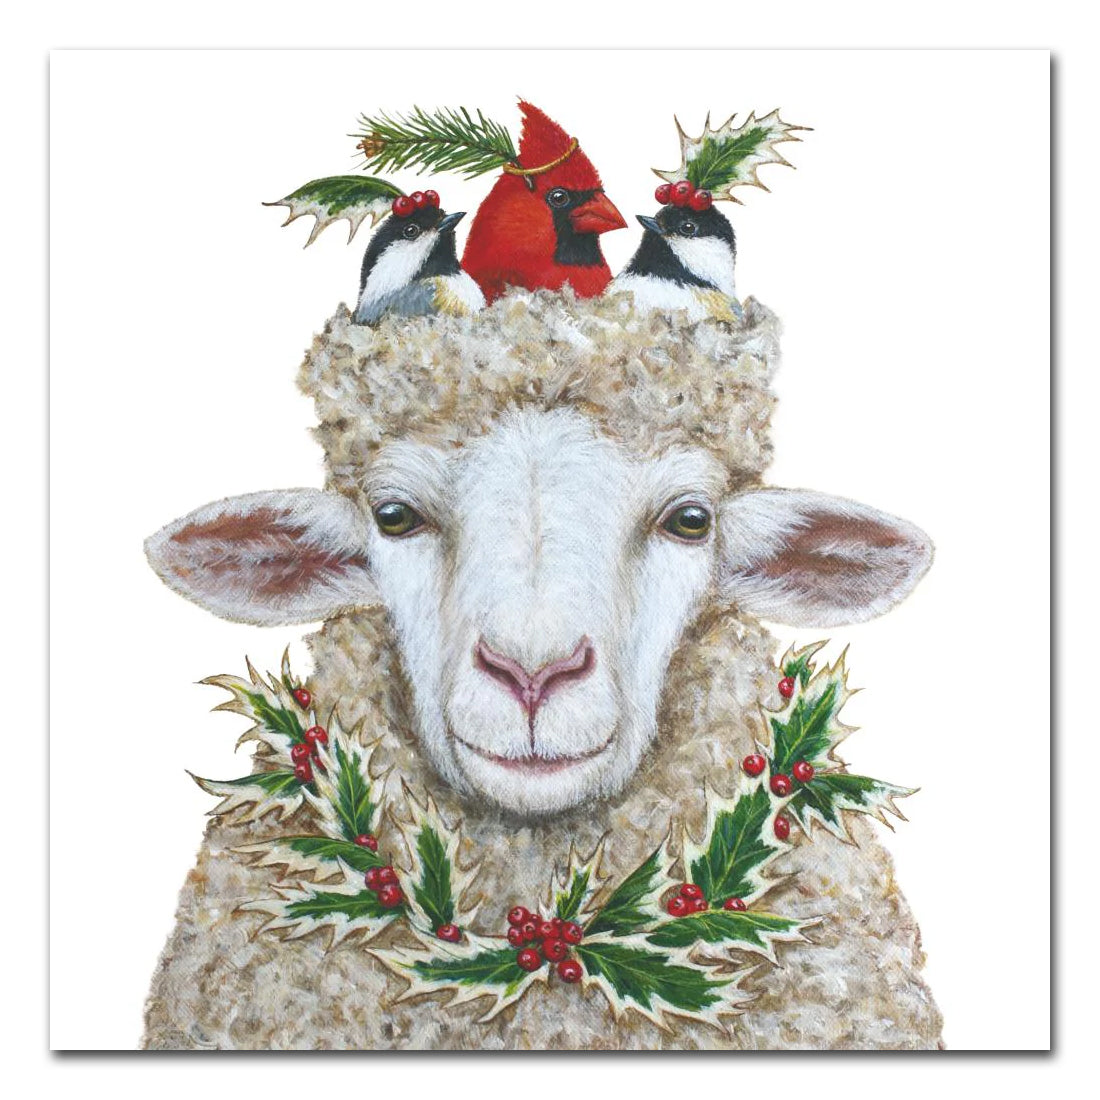 Off To The Party - Sheep Holiday Luncheon Napkins by Vicki Sawyer